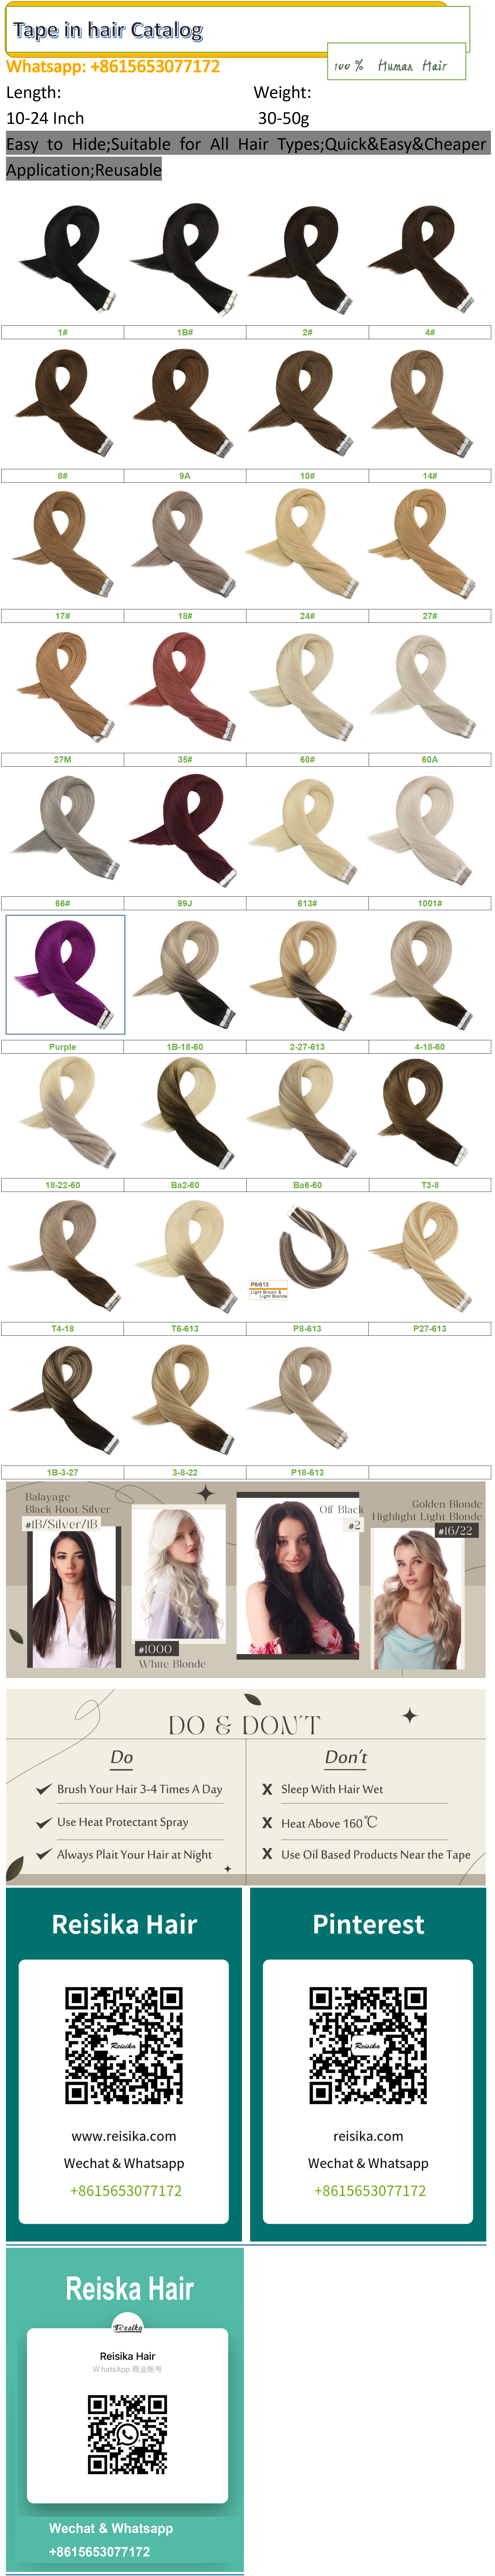 adhesive tape hair extensions